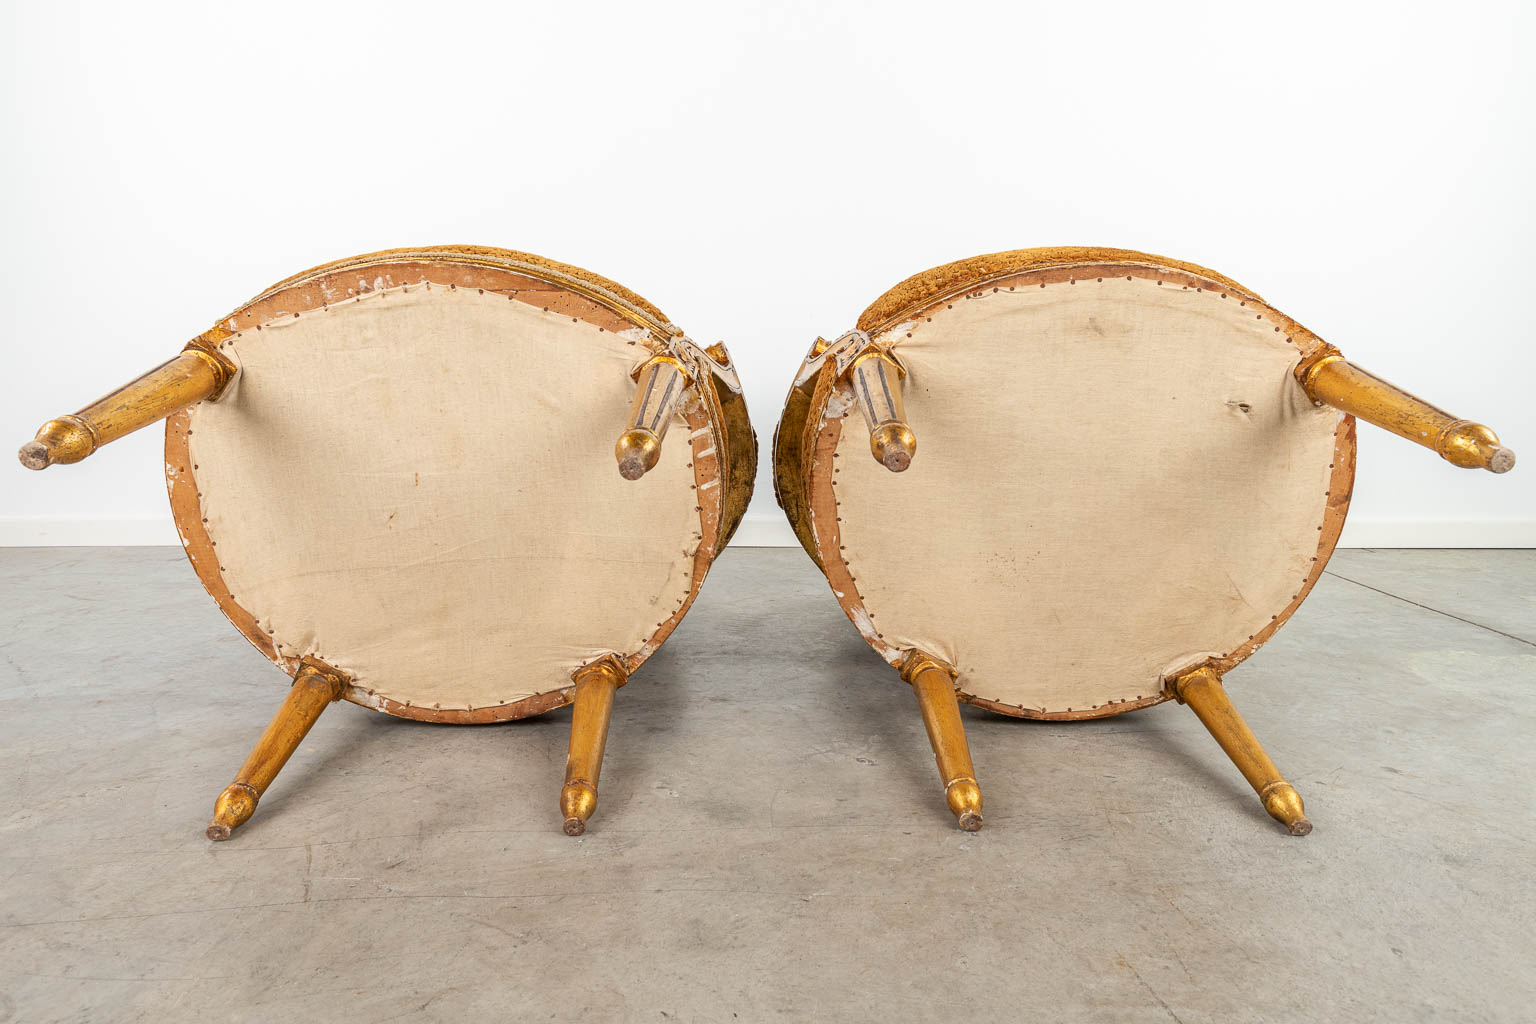 A pair of armchairs made in Louis XVI style. (H:100cm)